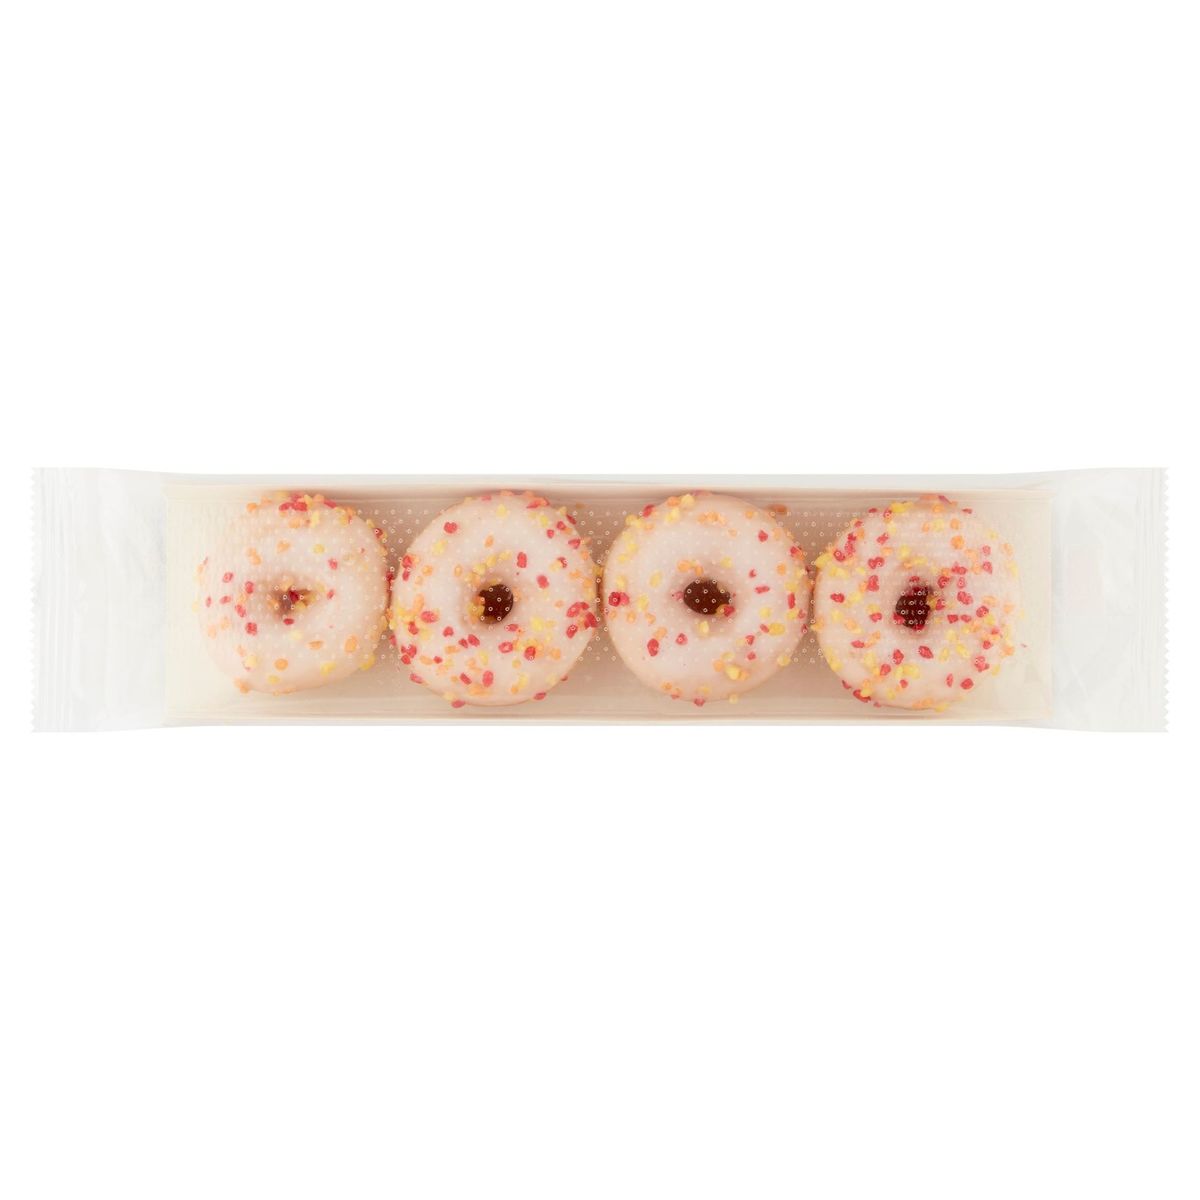 Donuts 4 x 18 g